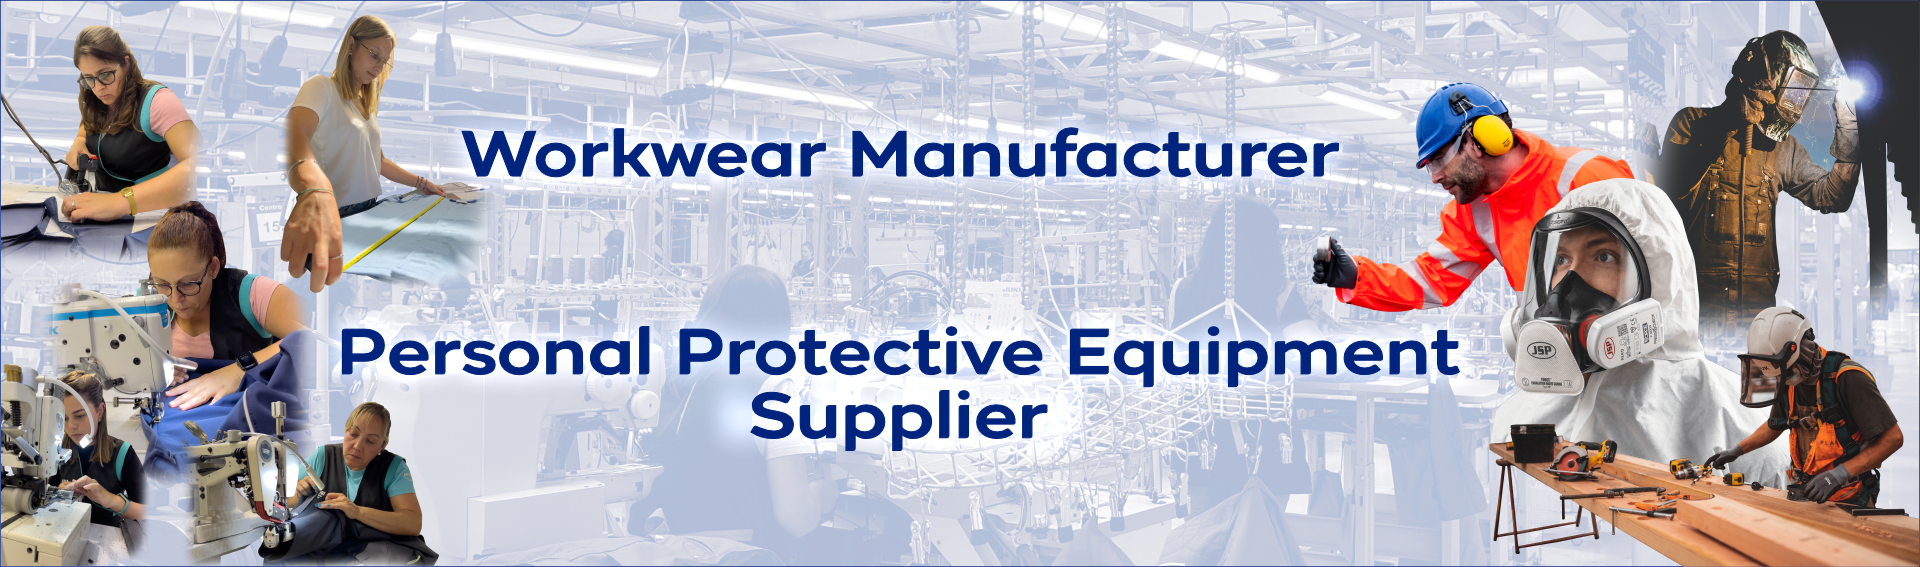 Workwear Manufacturer and PPE Supplier